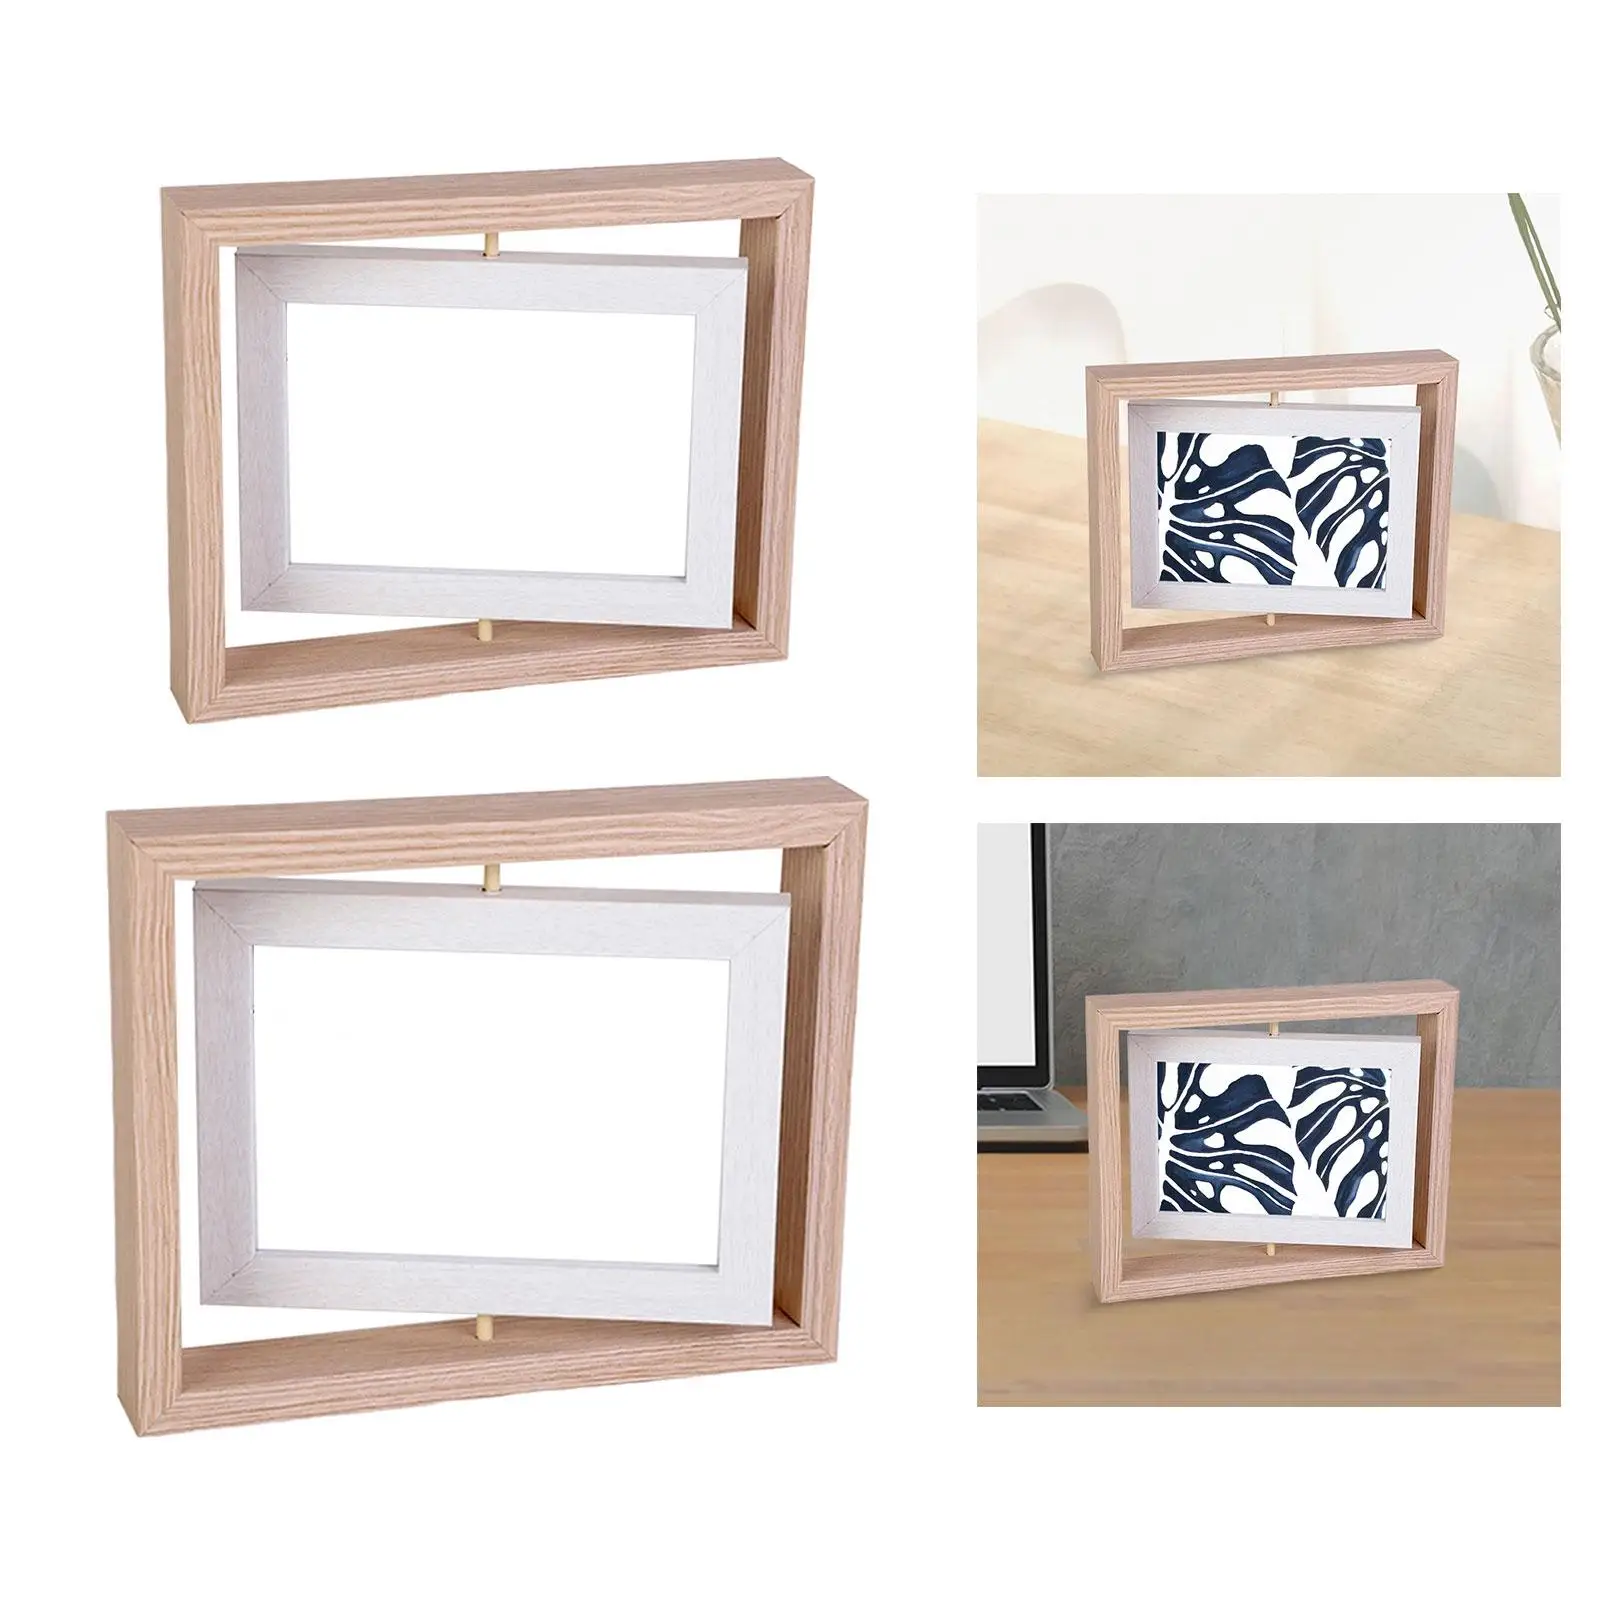 Rotating Picture Frame for Home Decor Easy to Install Clear DIY Double Sided Photo Frame for Weddings Office Table Aunt Grandma